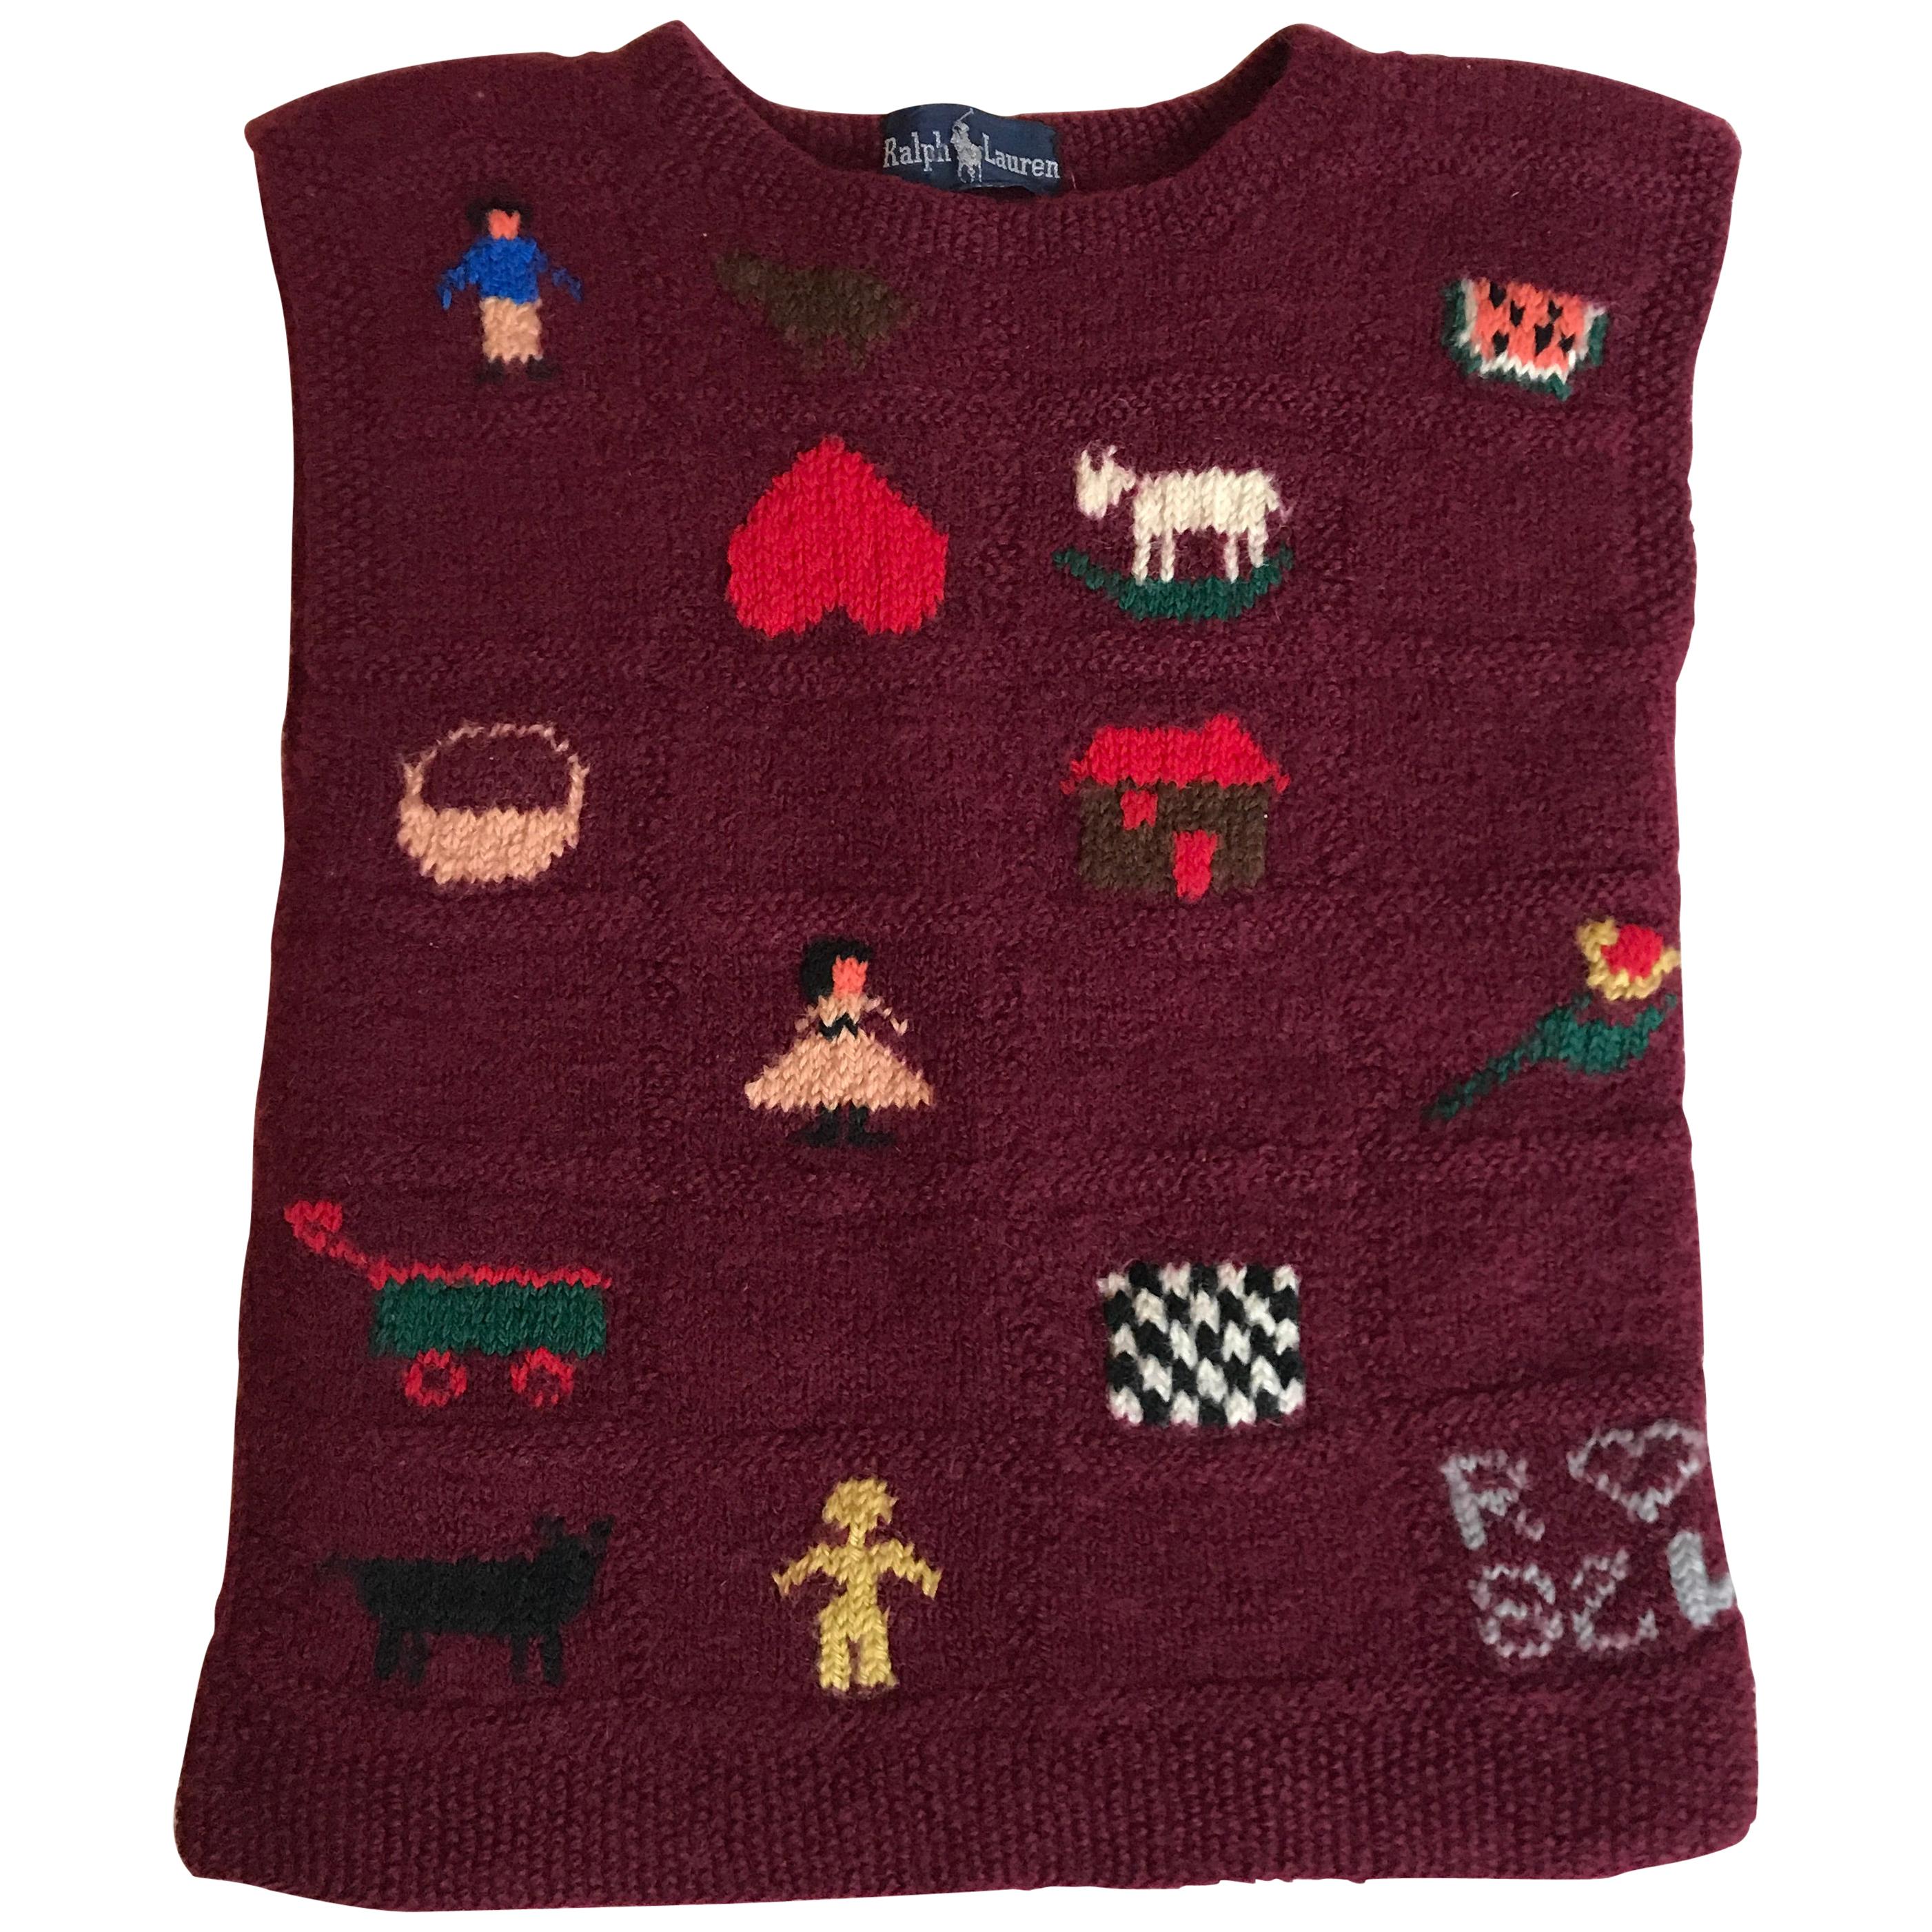 Collectable Ralph Lauren Hand Knitted "American Sampler" Sweater from 1982 For Sale